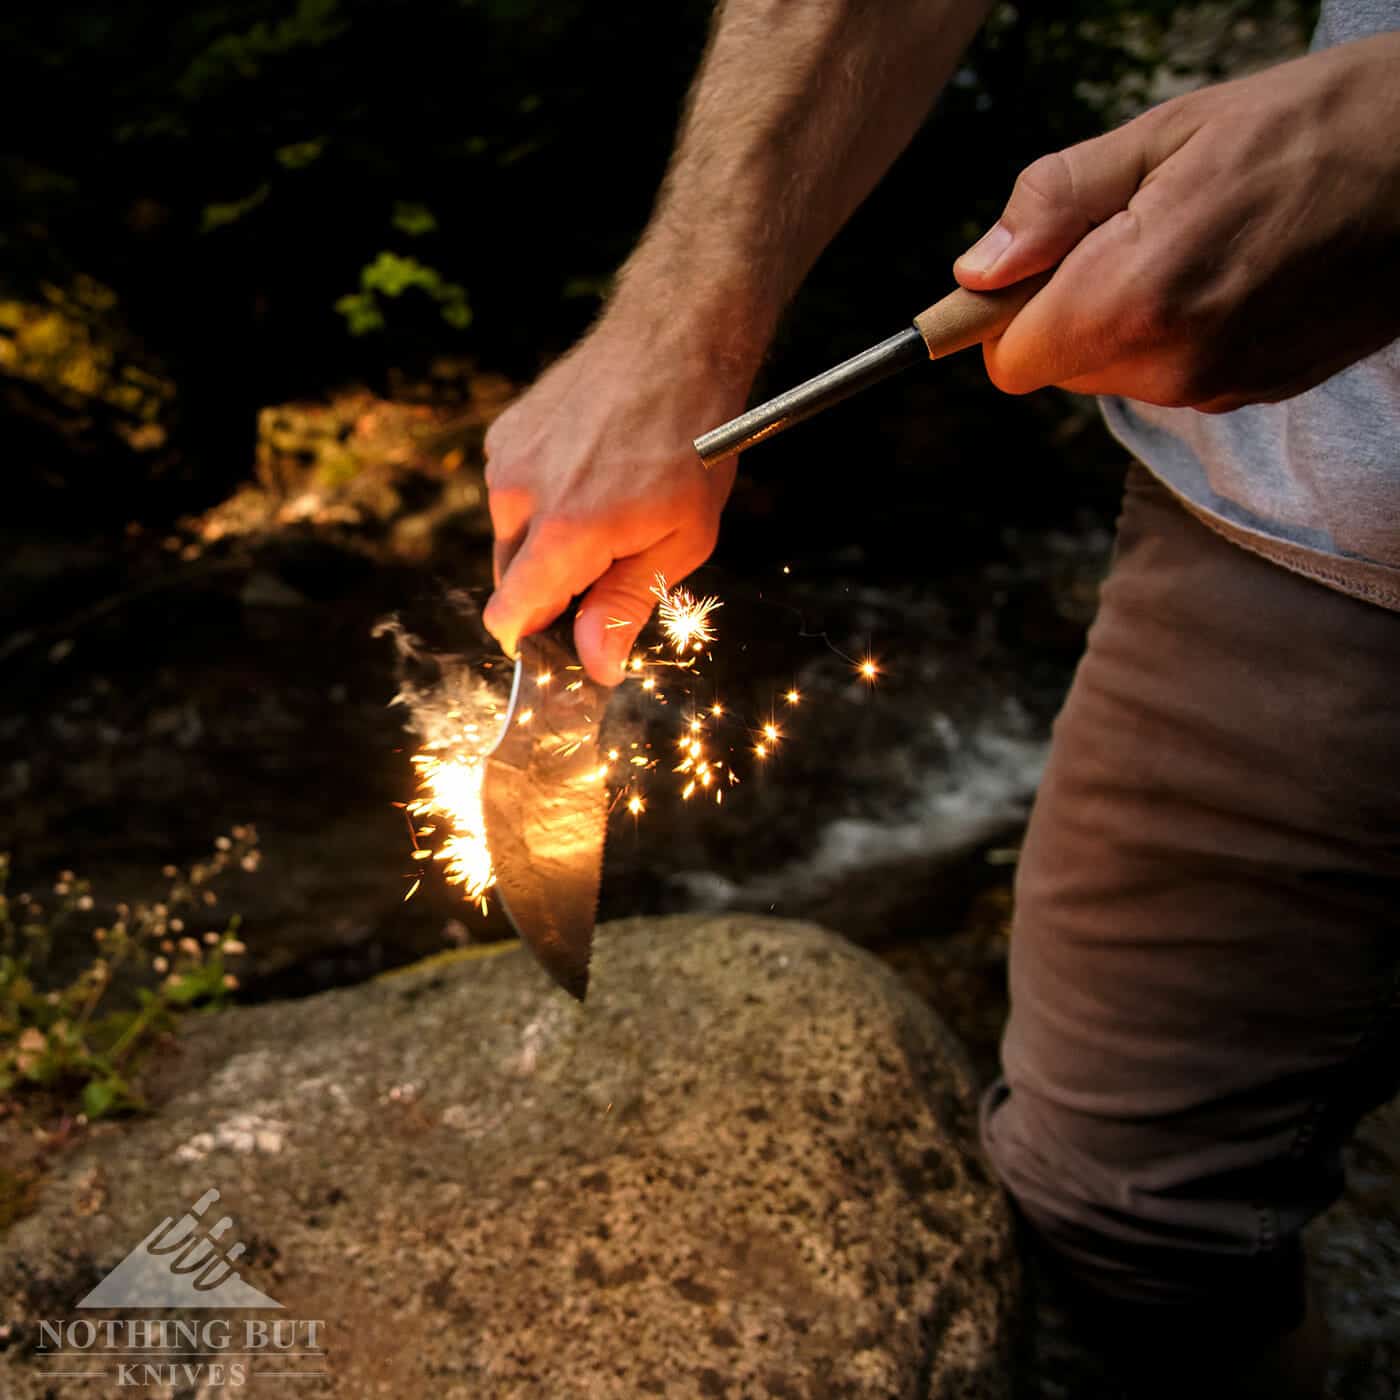 The Ironside Tracker is a great knife for starting fires. 